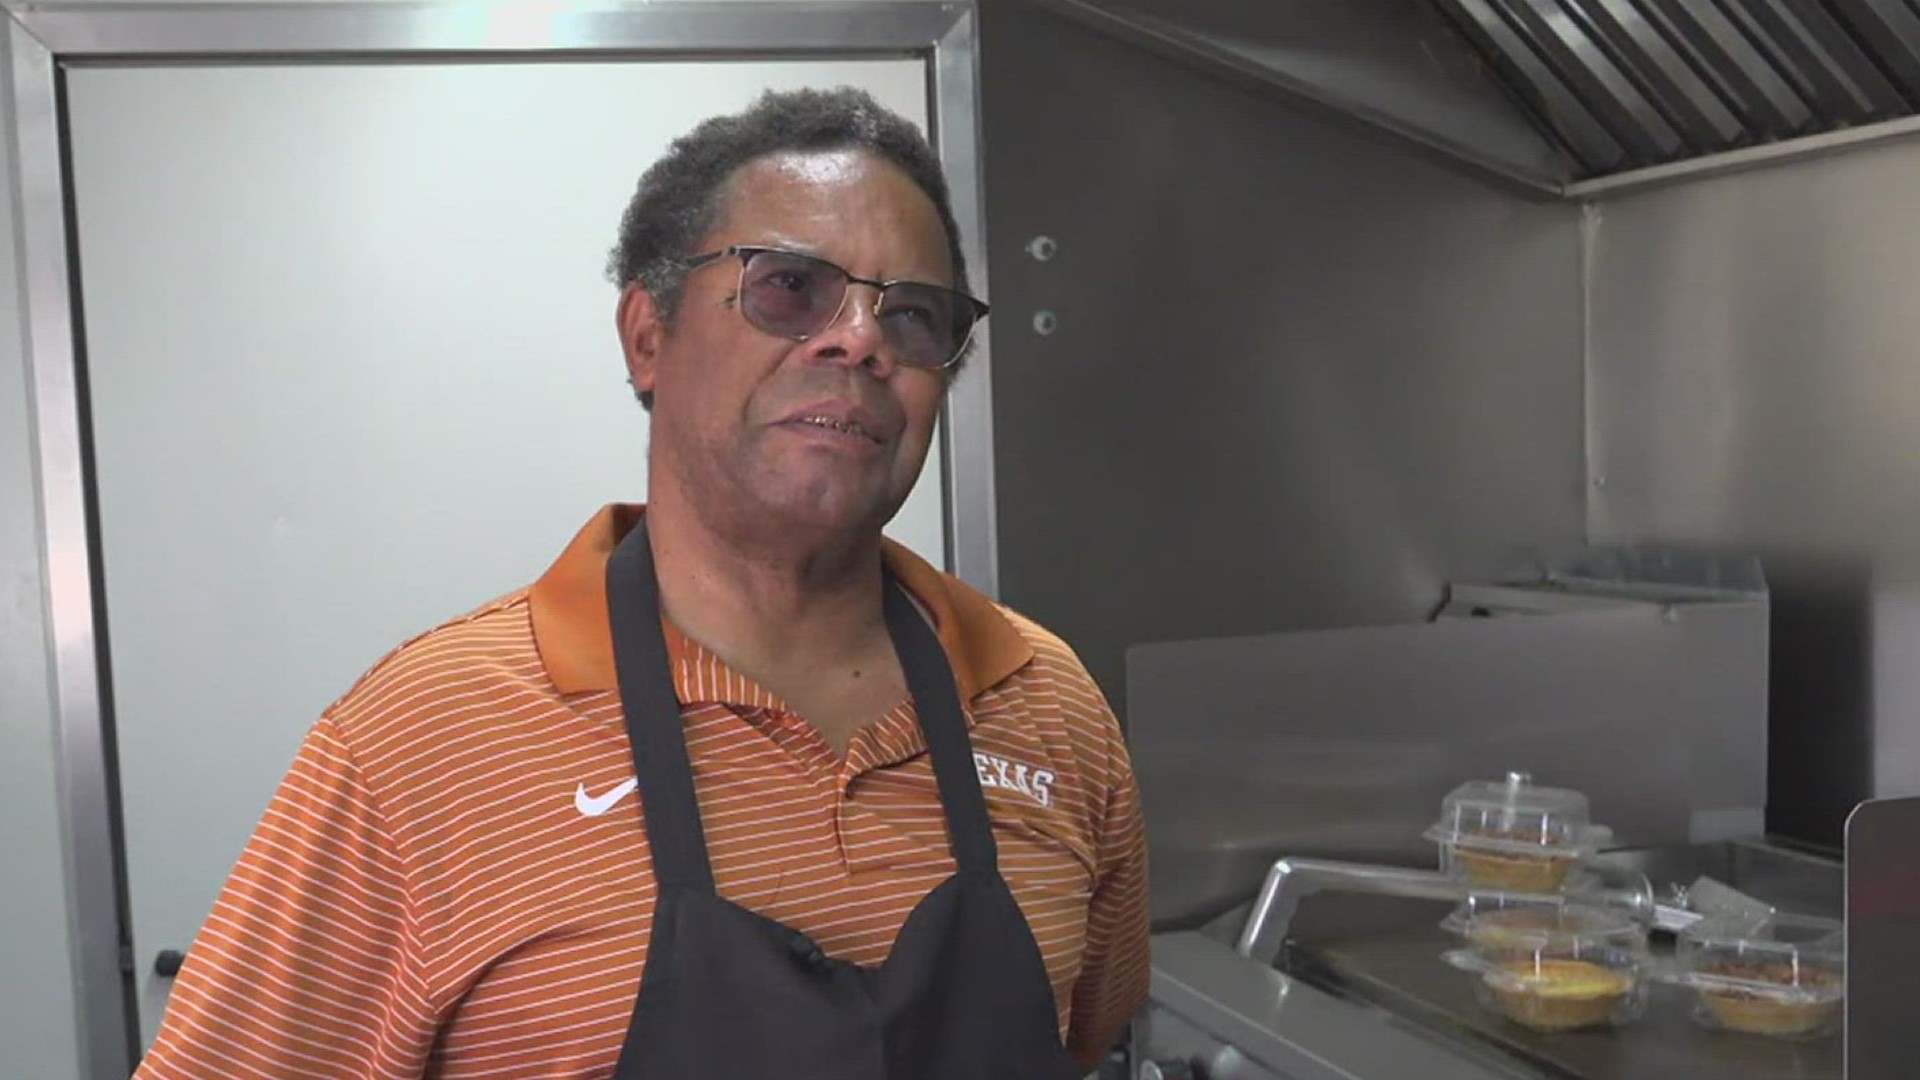 Daniel Roberson, also known as 'The Pie Man,' spent 20+ years as a truck driver before he opened for business. Find the food truck over at Weber and Gollihar.